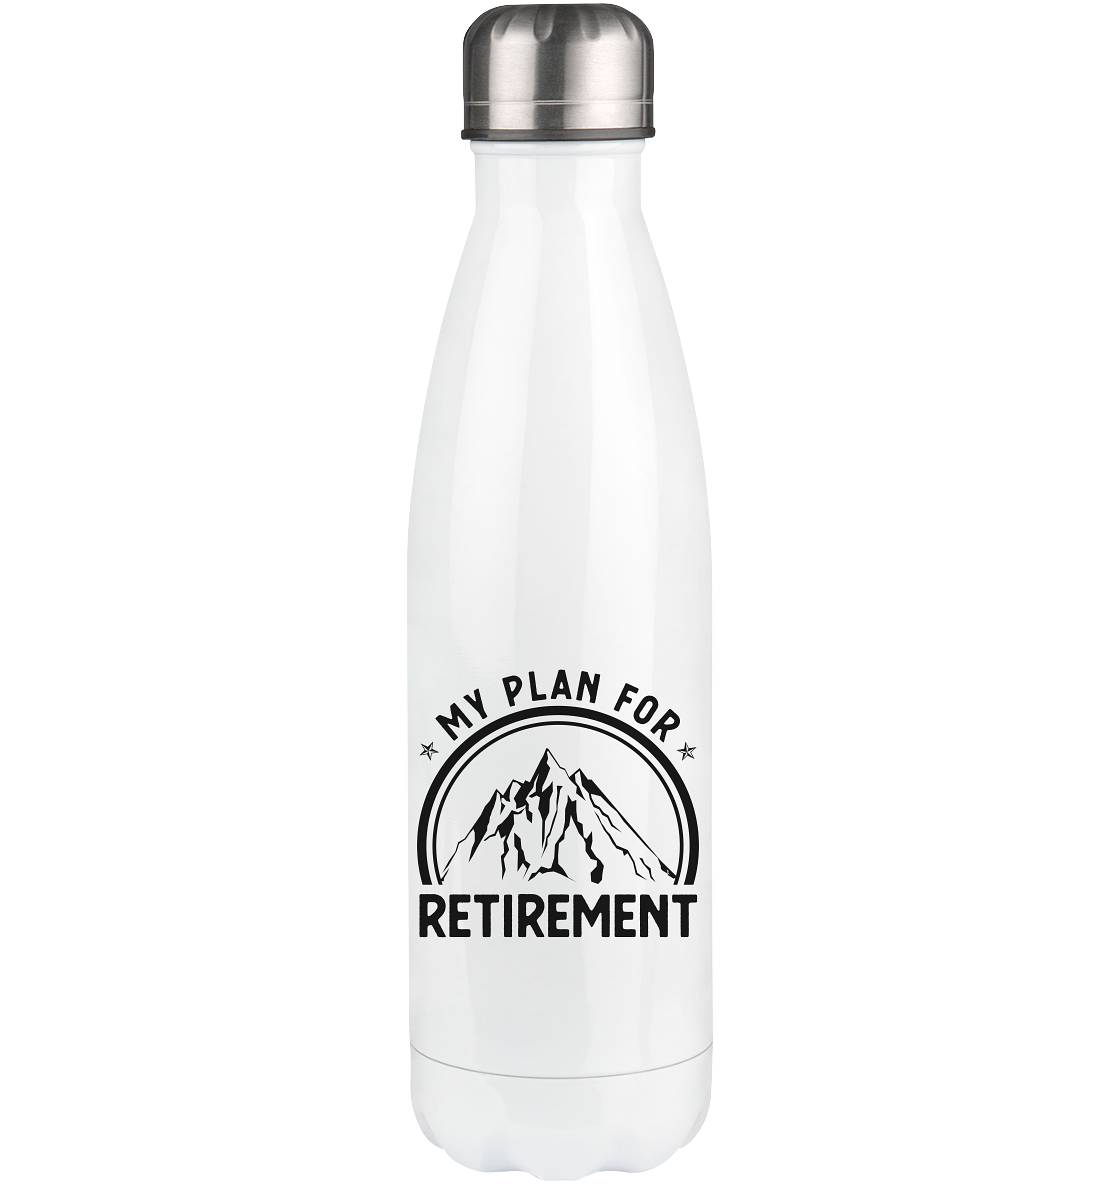 My Plan For Retirement - Edelstahl Thermosflasche berge 500ml